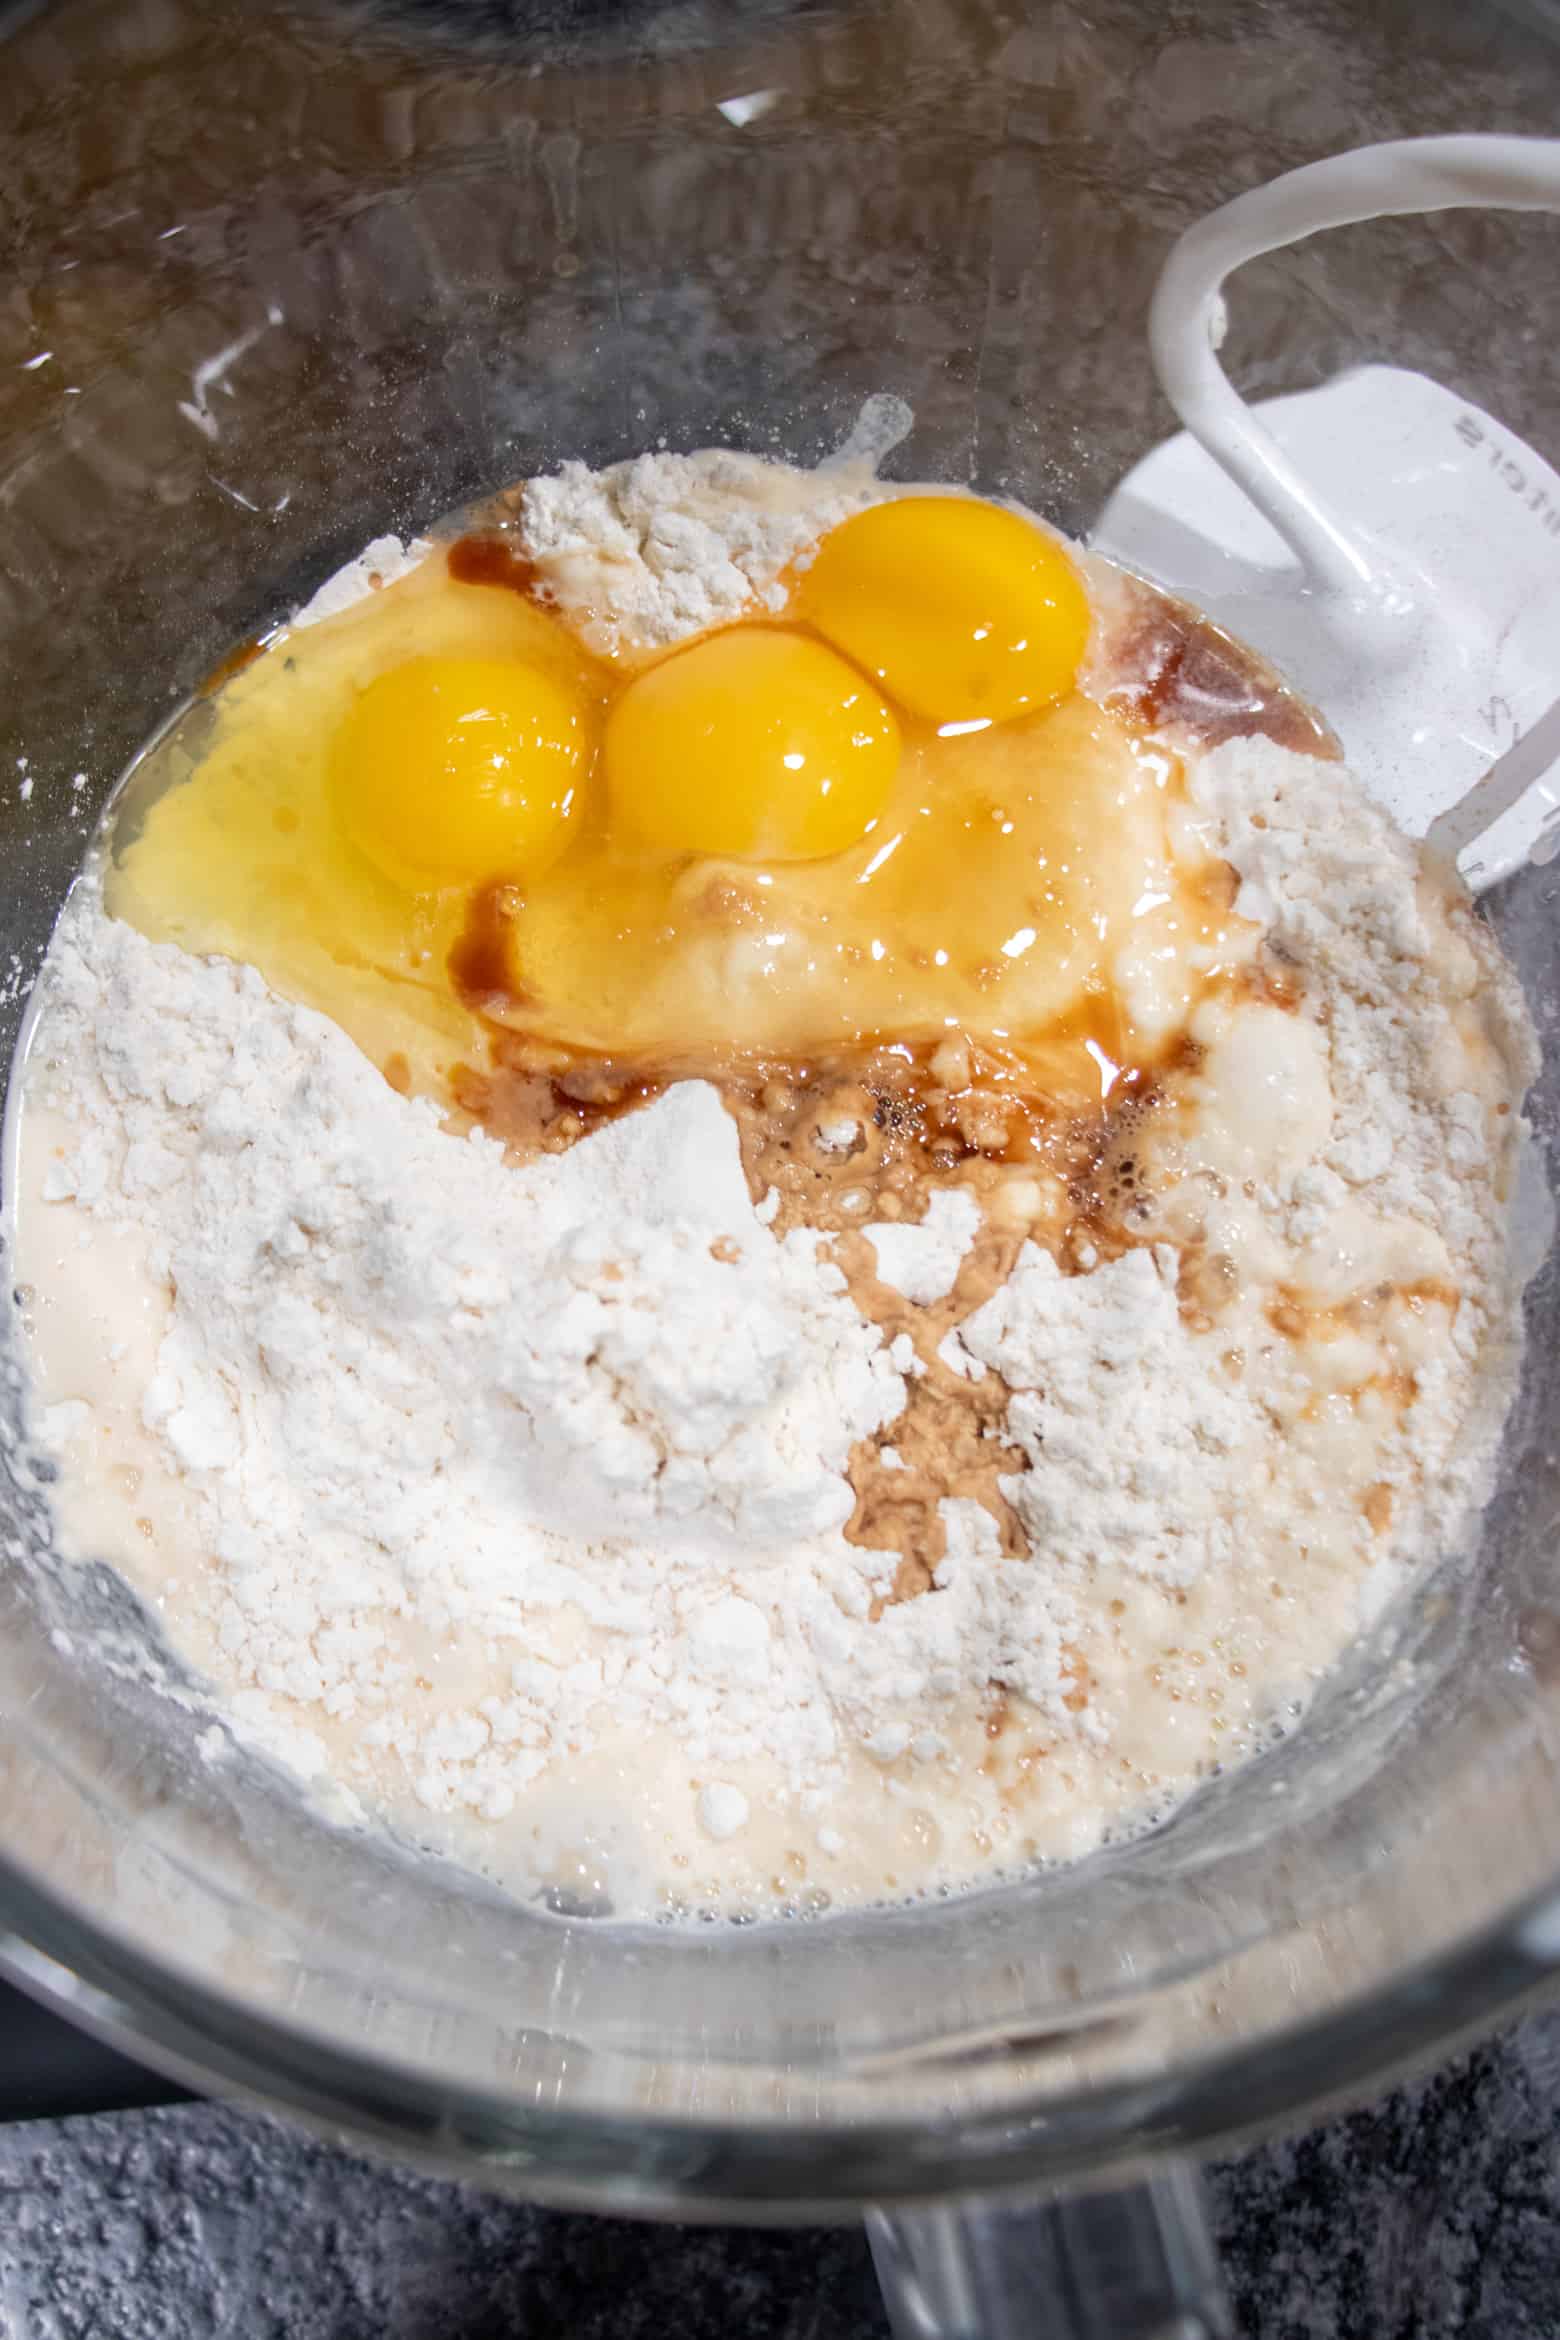 Dry ingredients and eggs in a mixing bowl